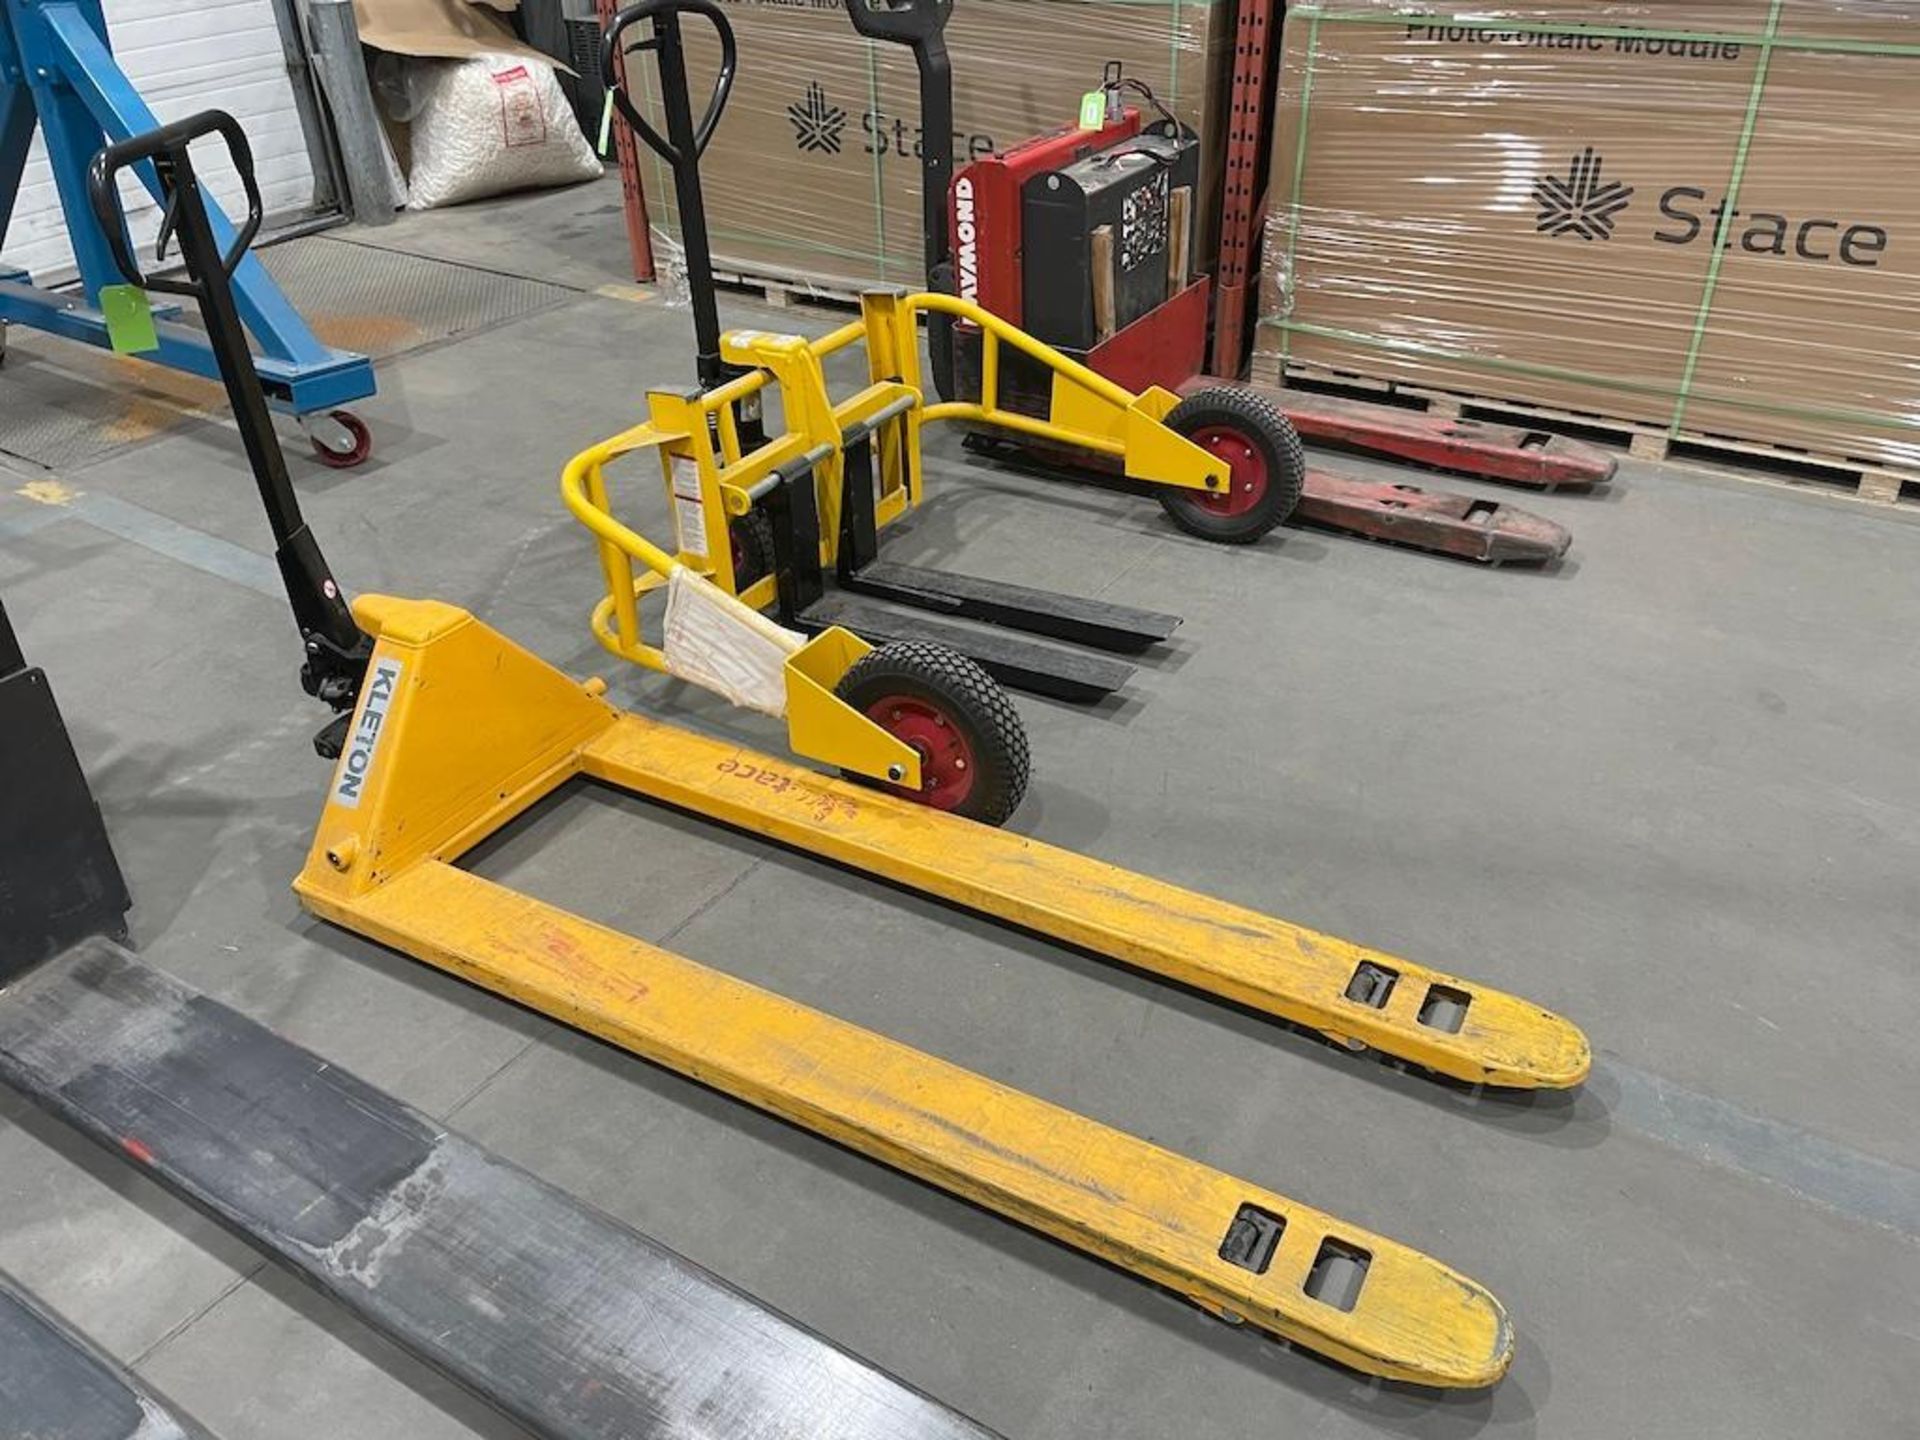 KLETON PALLET JACK, 6 FT FORKS [TROIS RIVIERES]*PLEASE NOTE, EXCLUSIVE RIGGING FEE OF $100 WILL BE A